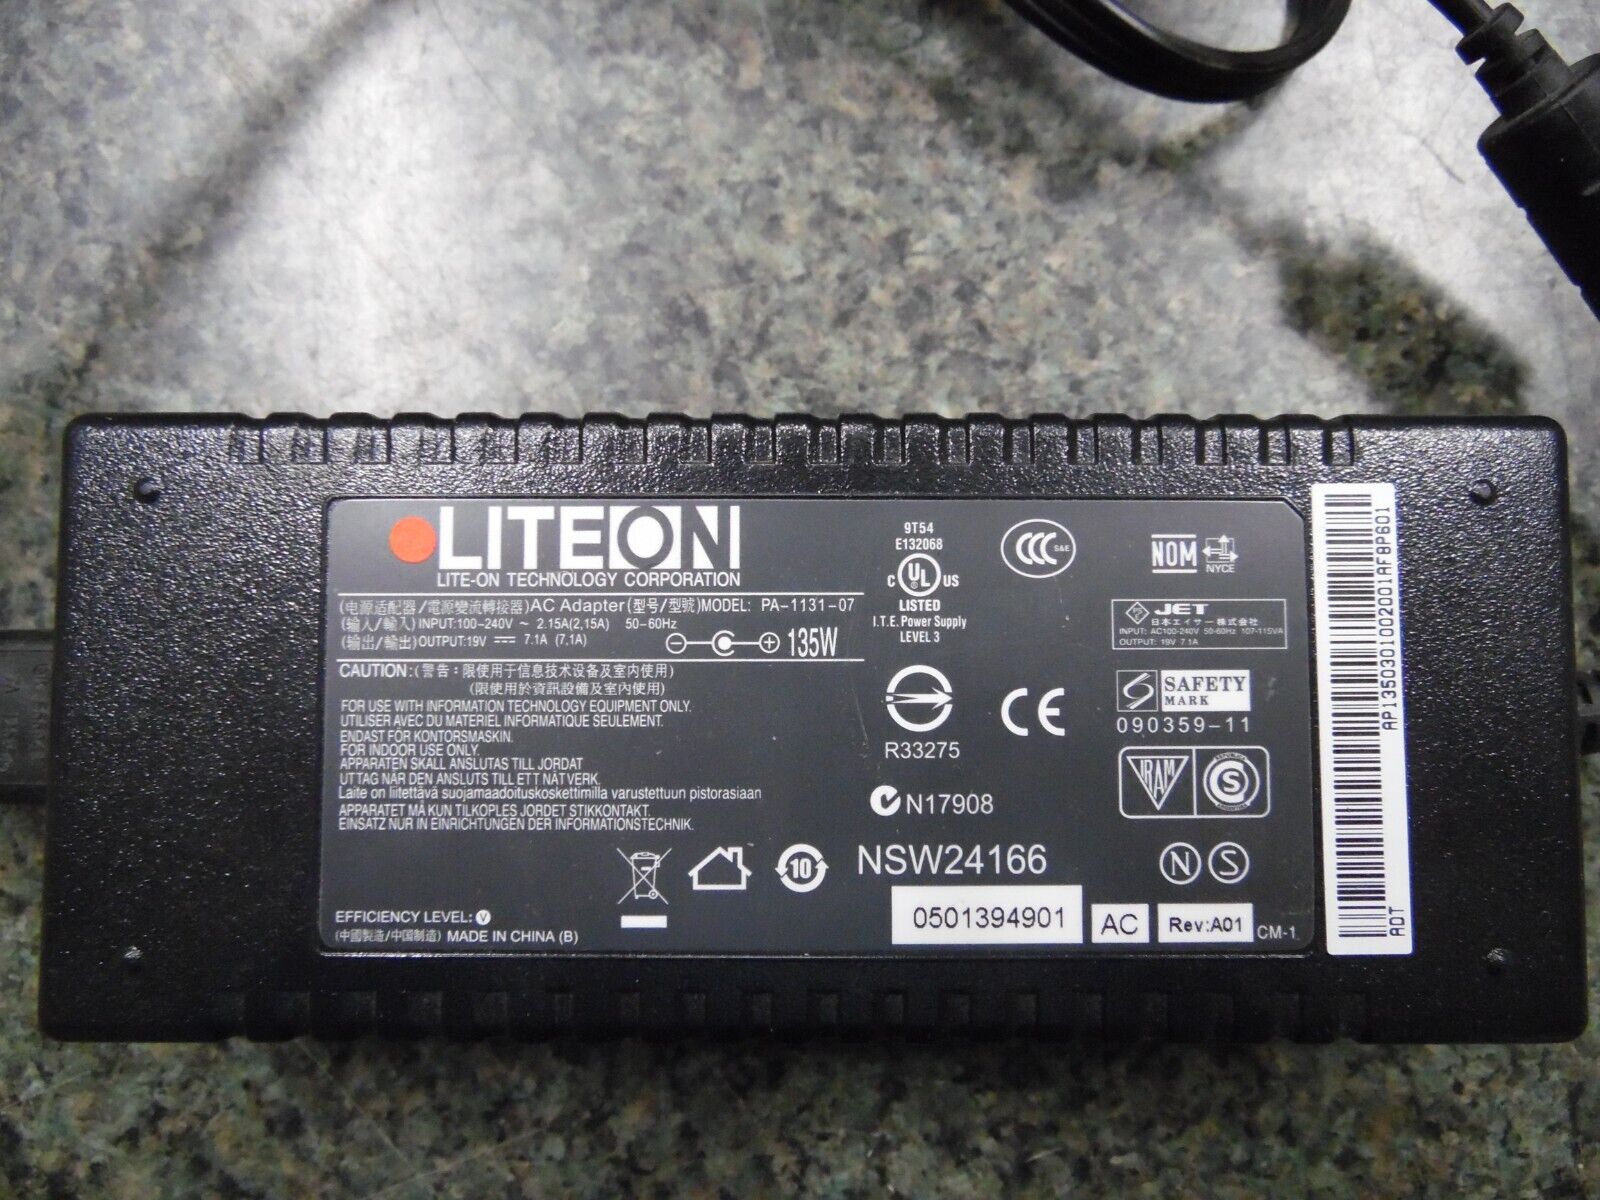 Genuine LiteON for Acer Charger AC Power Adapter PA-1131-07 19V 135W 7.4mm Tip